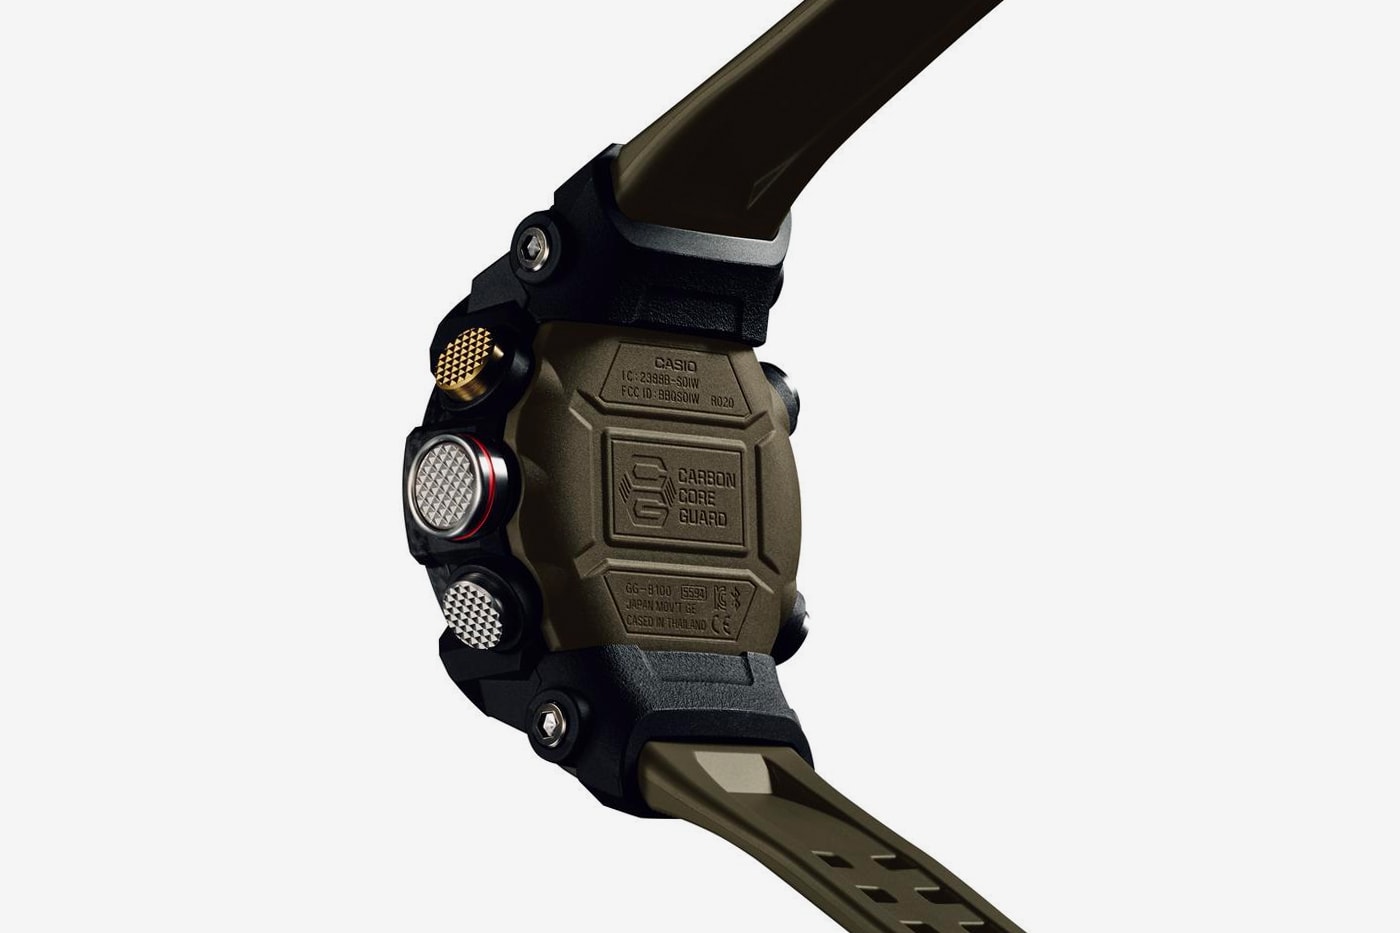 G SHOCK Mudmaster GG B100 Release Info carbon fiber core guard technology altimeter thermometer barometer accelerometer timepiece watches accessories casio